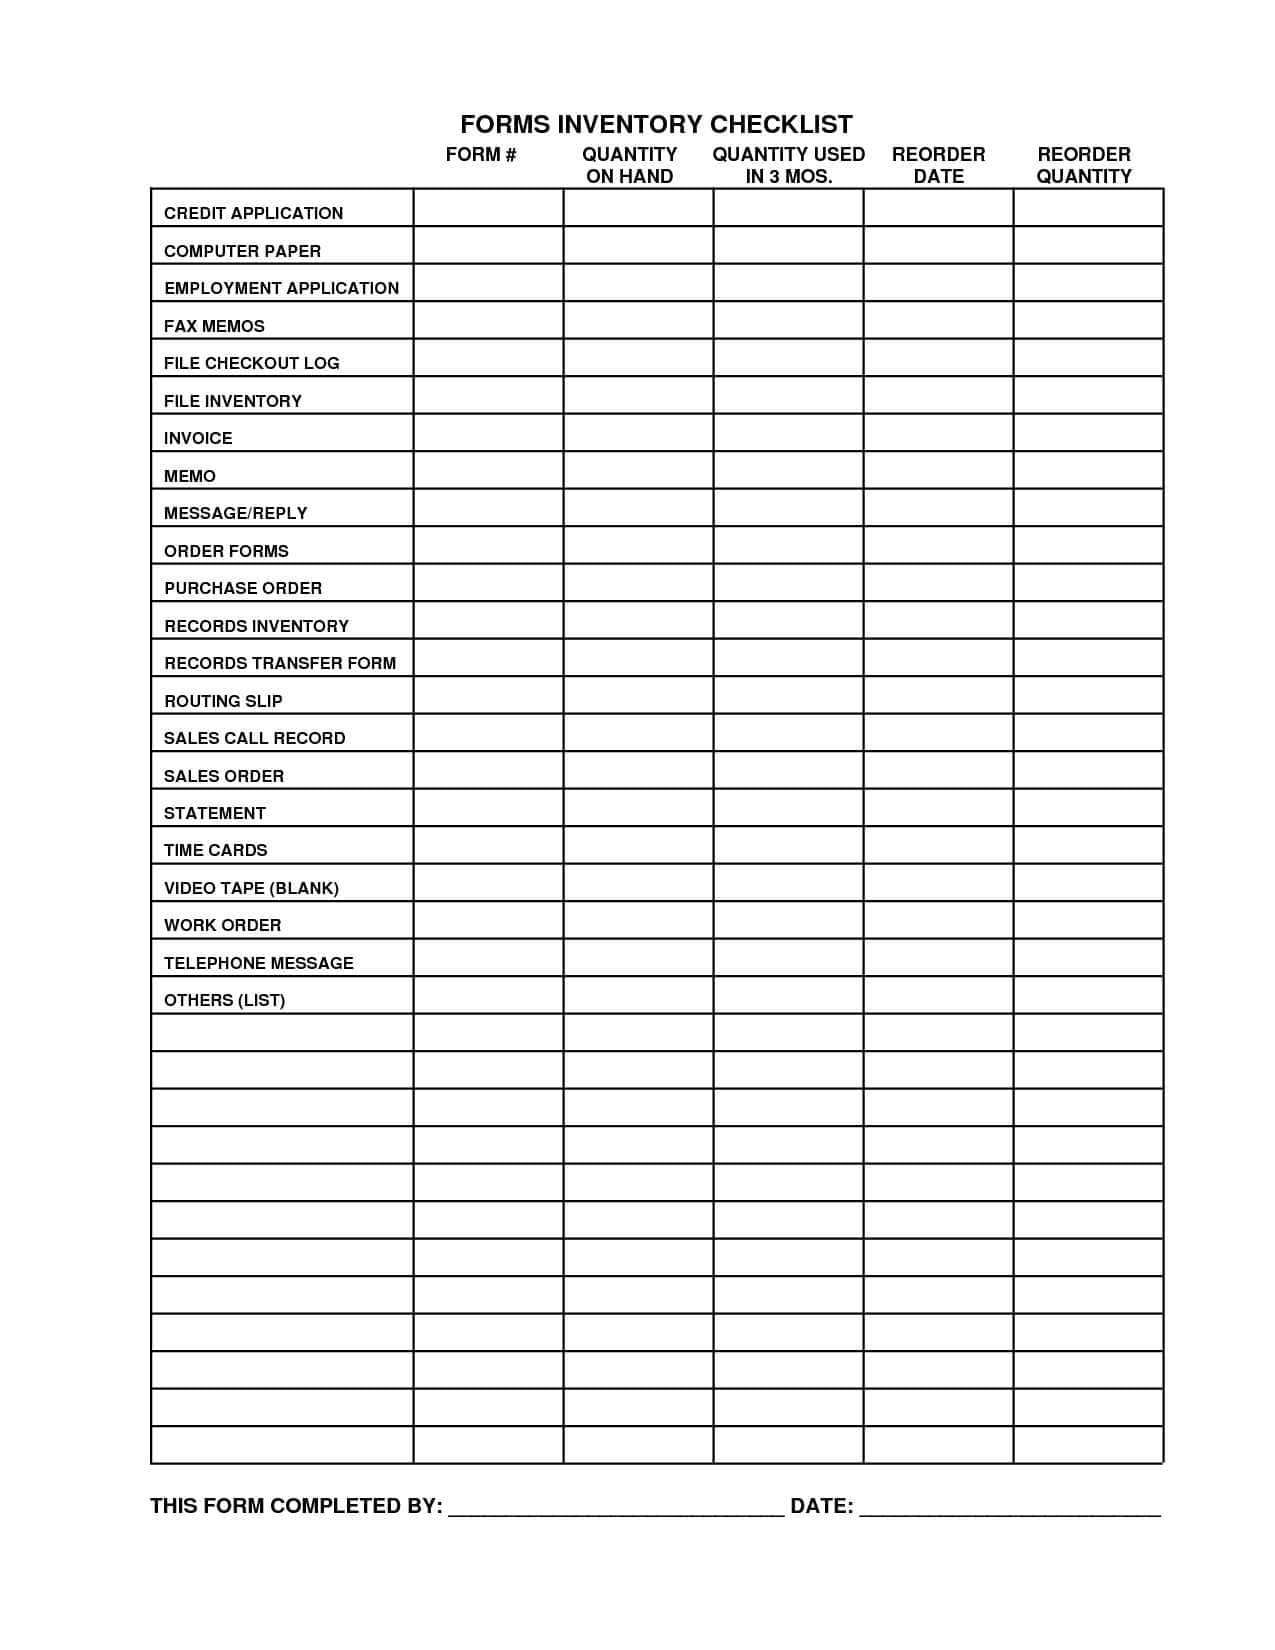 Contents Insurance Checklist Spreadsheet inside Home Inventory Template